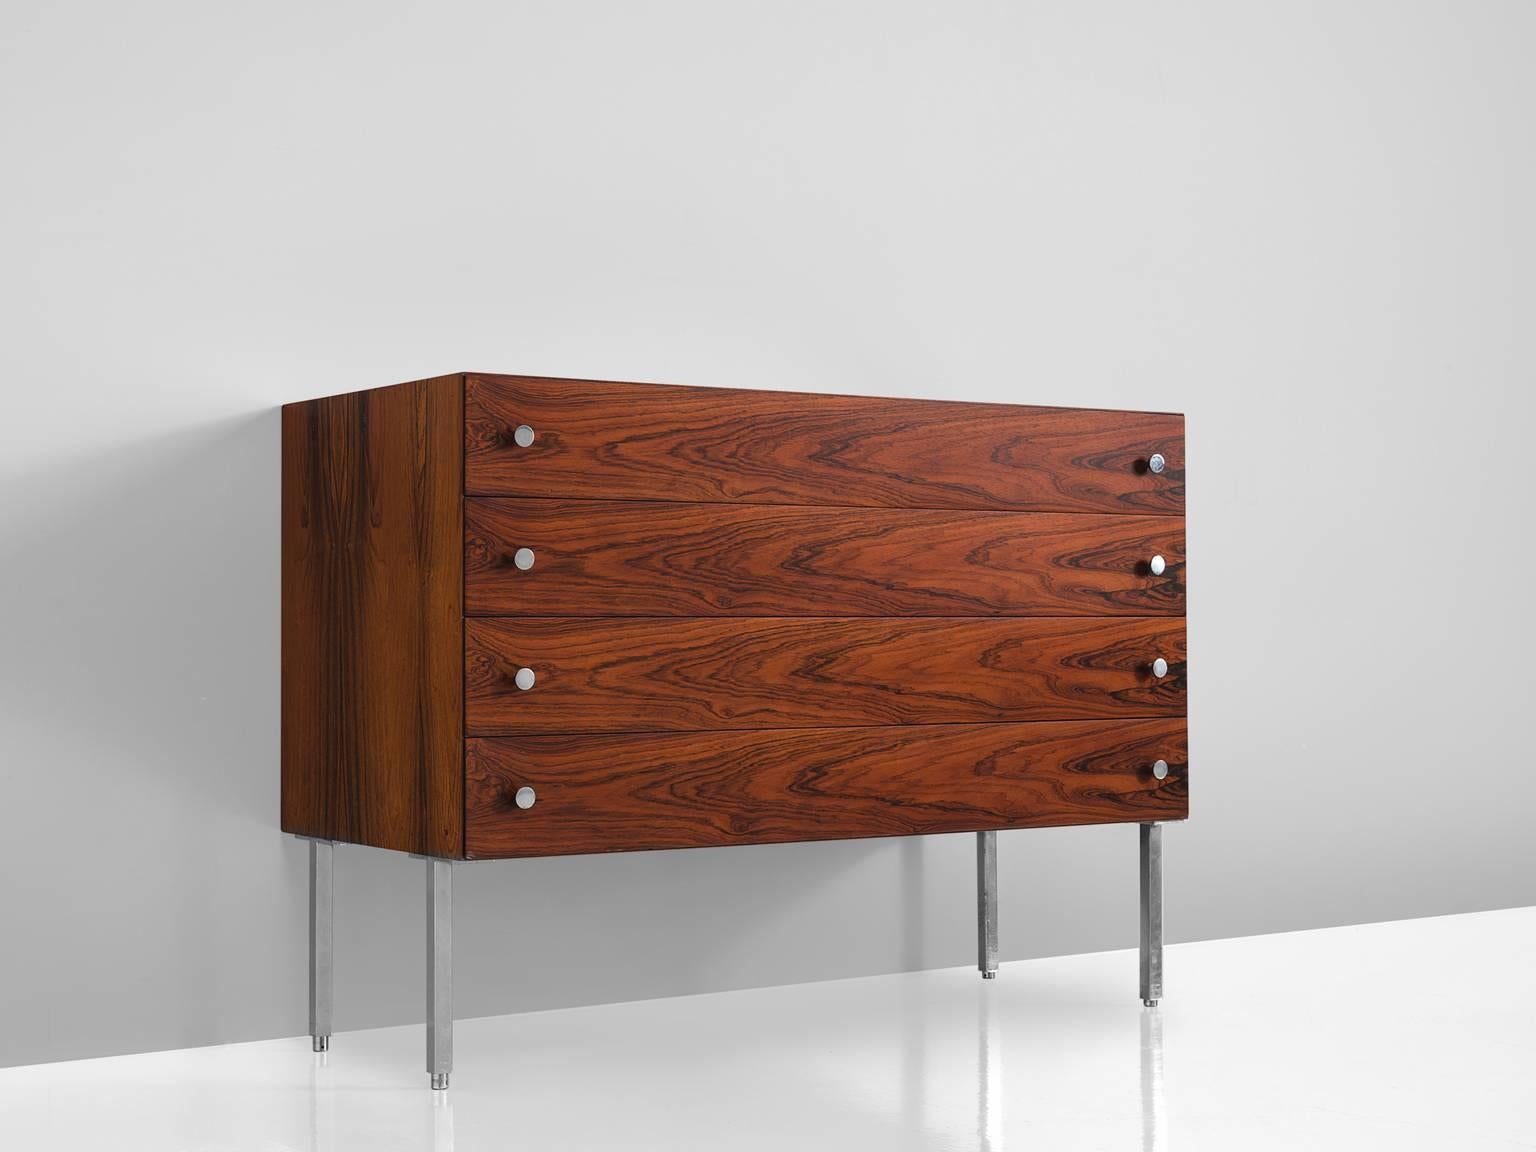 Poul Nørreklit, cabinet, metal, rosewood, Denmark, 1960s

This cabinet with four drawers by the Dane Nørreklit is part of the midcentury design collection. Nørreklit is known for the use of transparent, unconventional materials and a clear visual